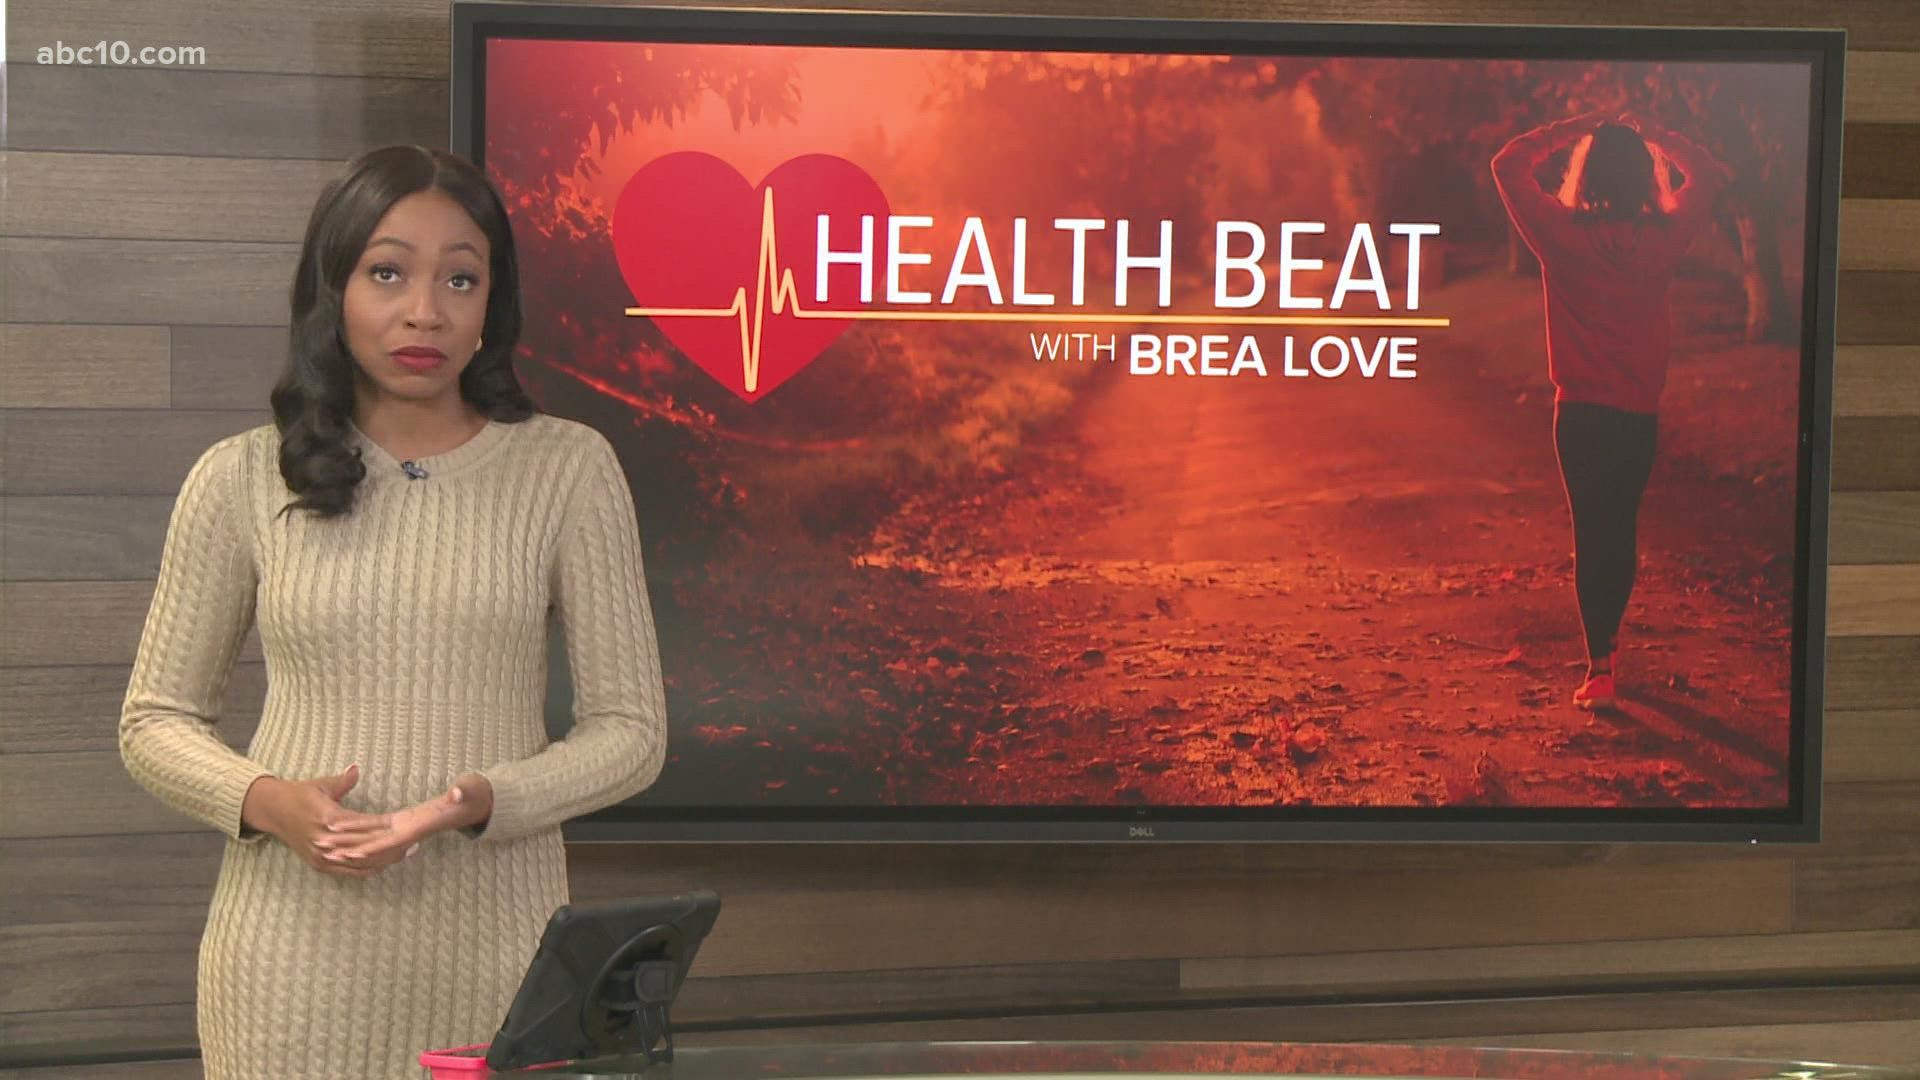 ABC10's Brea Love is back with another Health Beat, this time addressing weight gain during the pandemic.